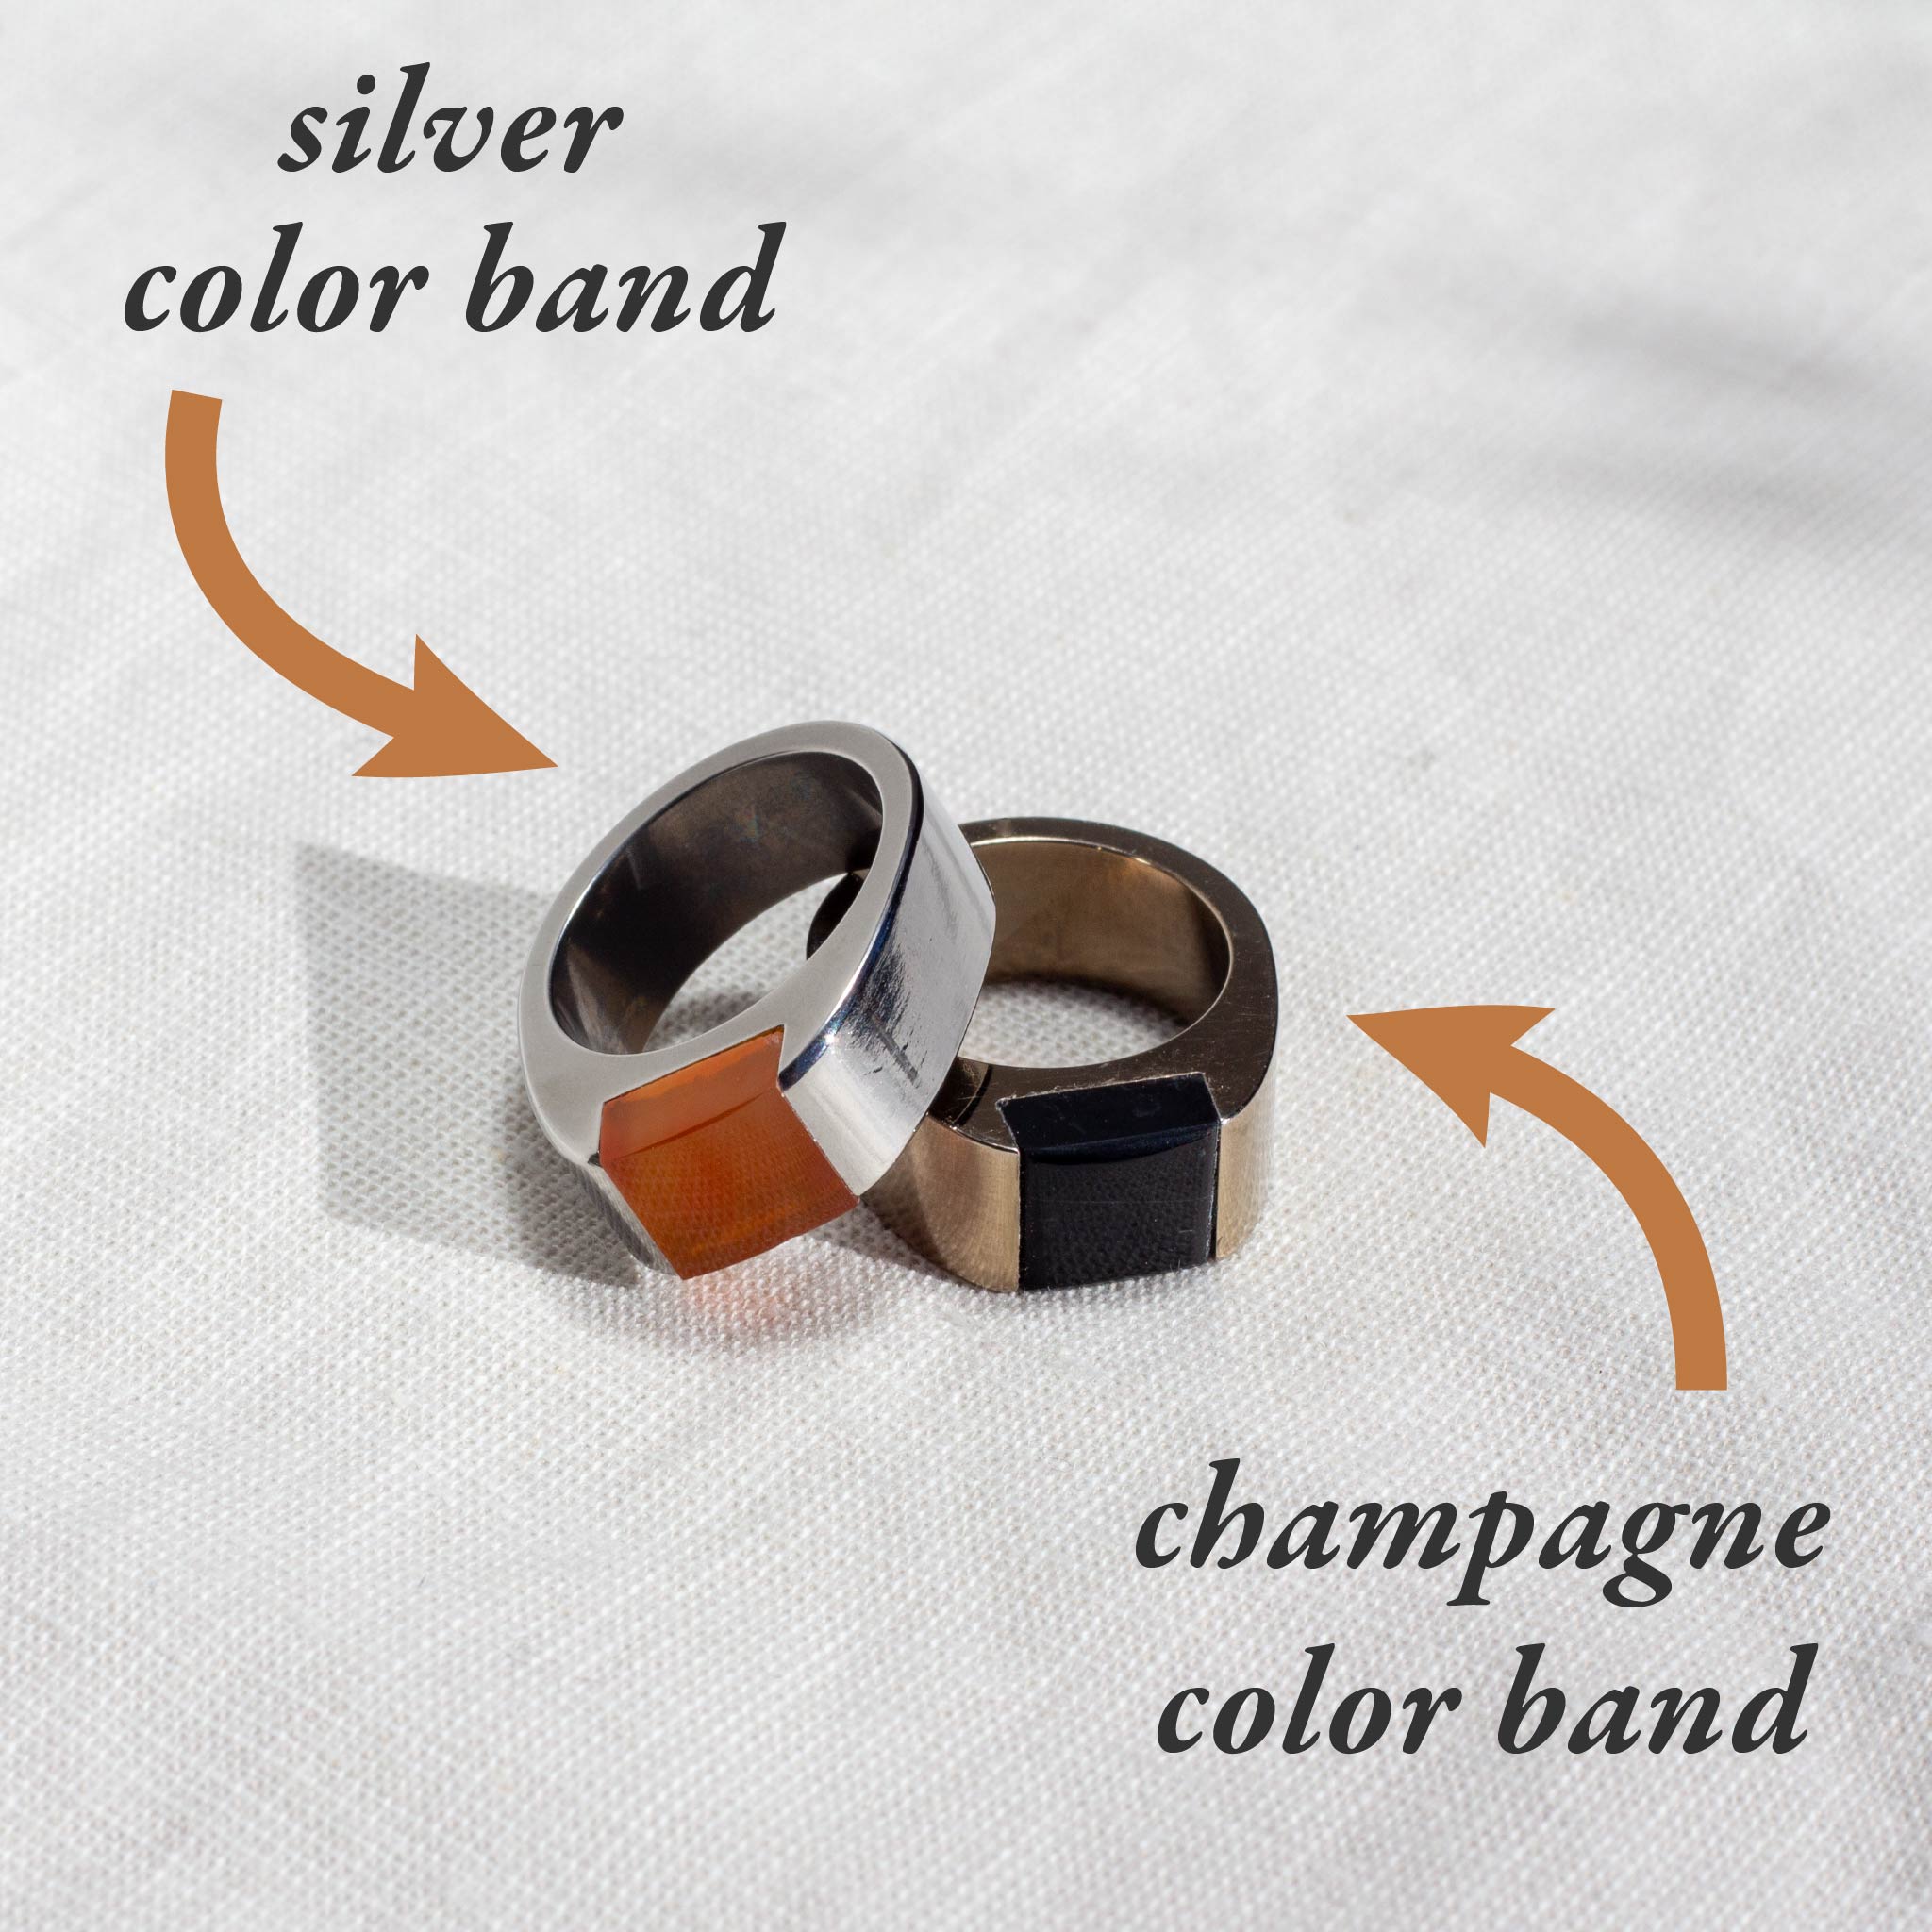 Two signet rings, one in silver color and one in champagne color